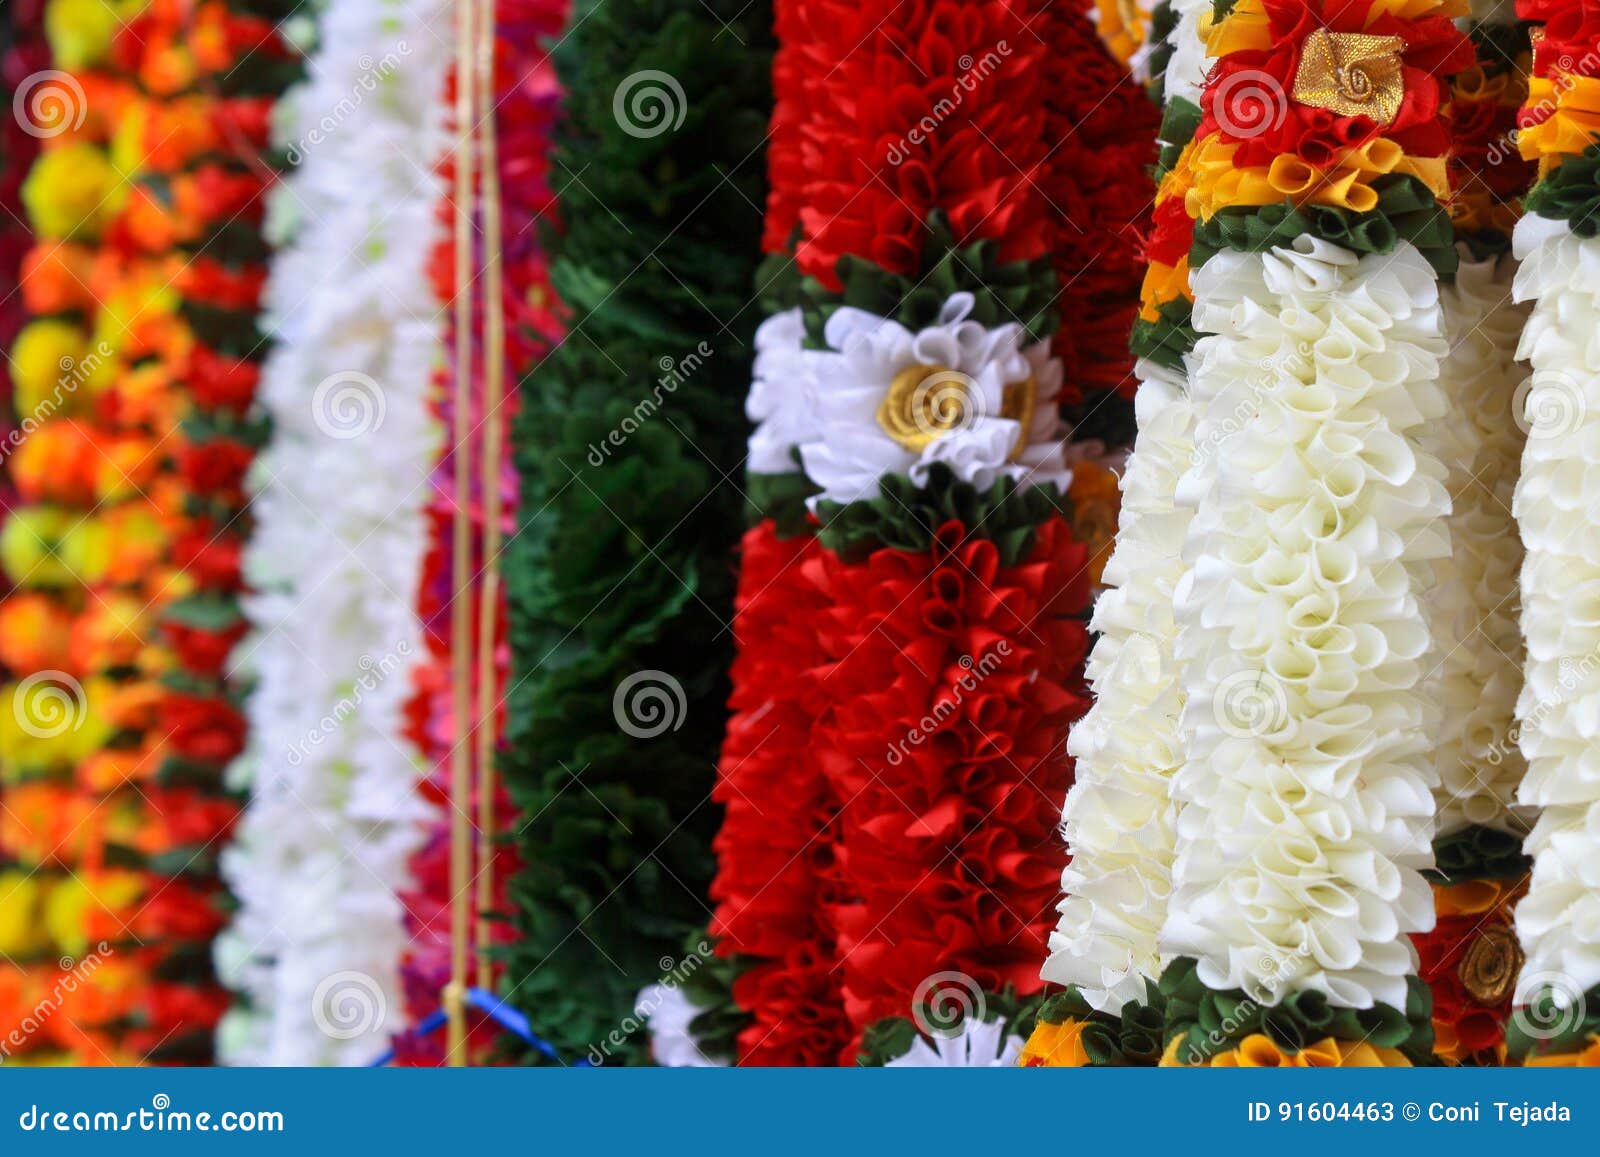 Indian Garland stock image. Image of indianculture, flower - 91604463